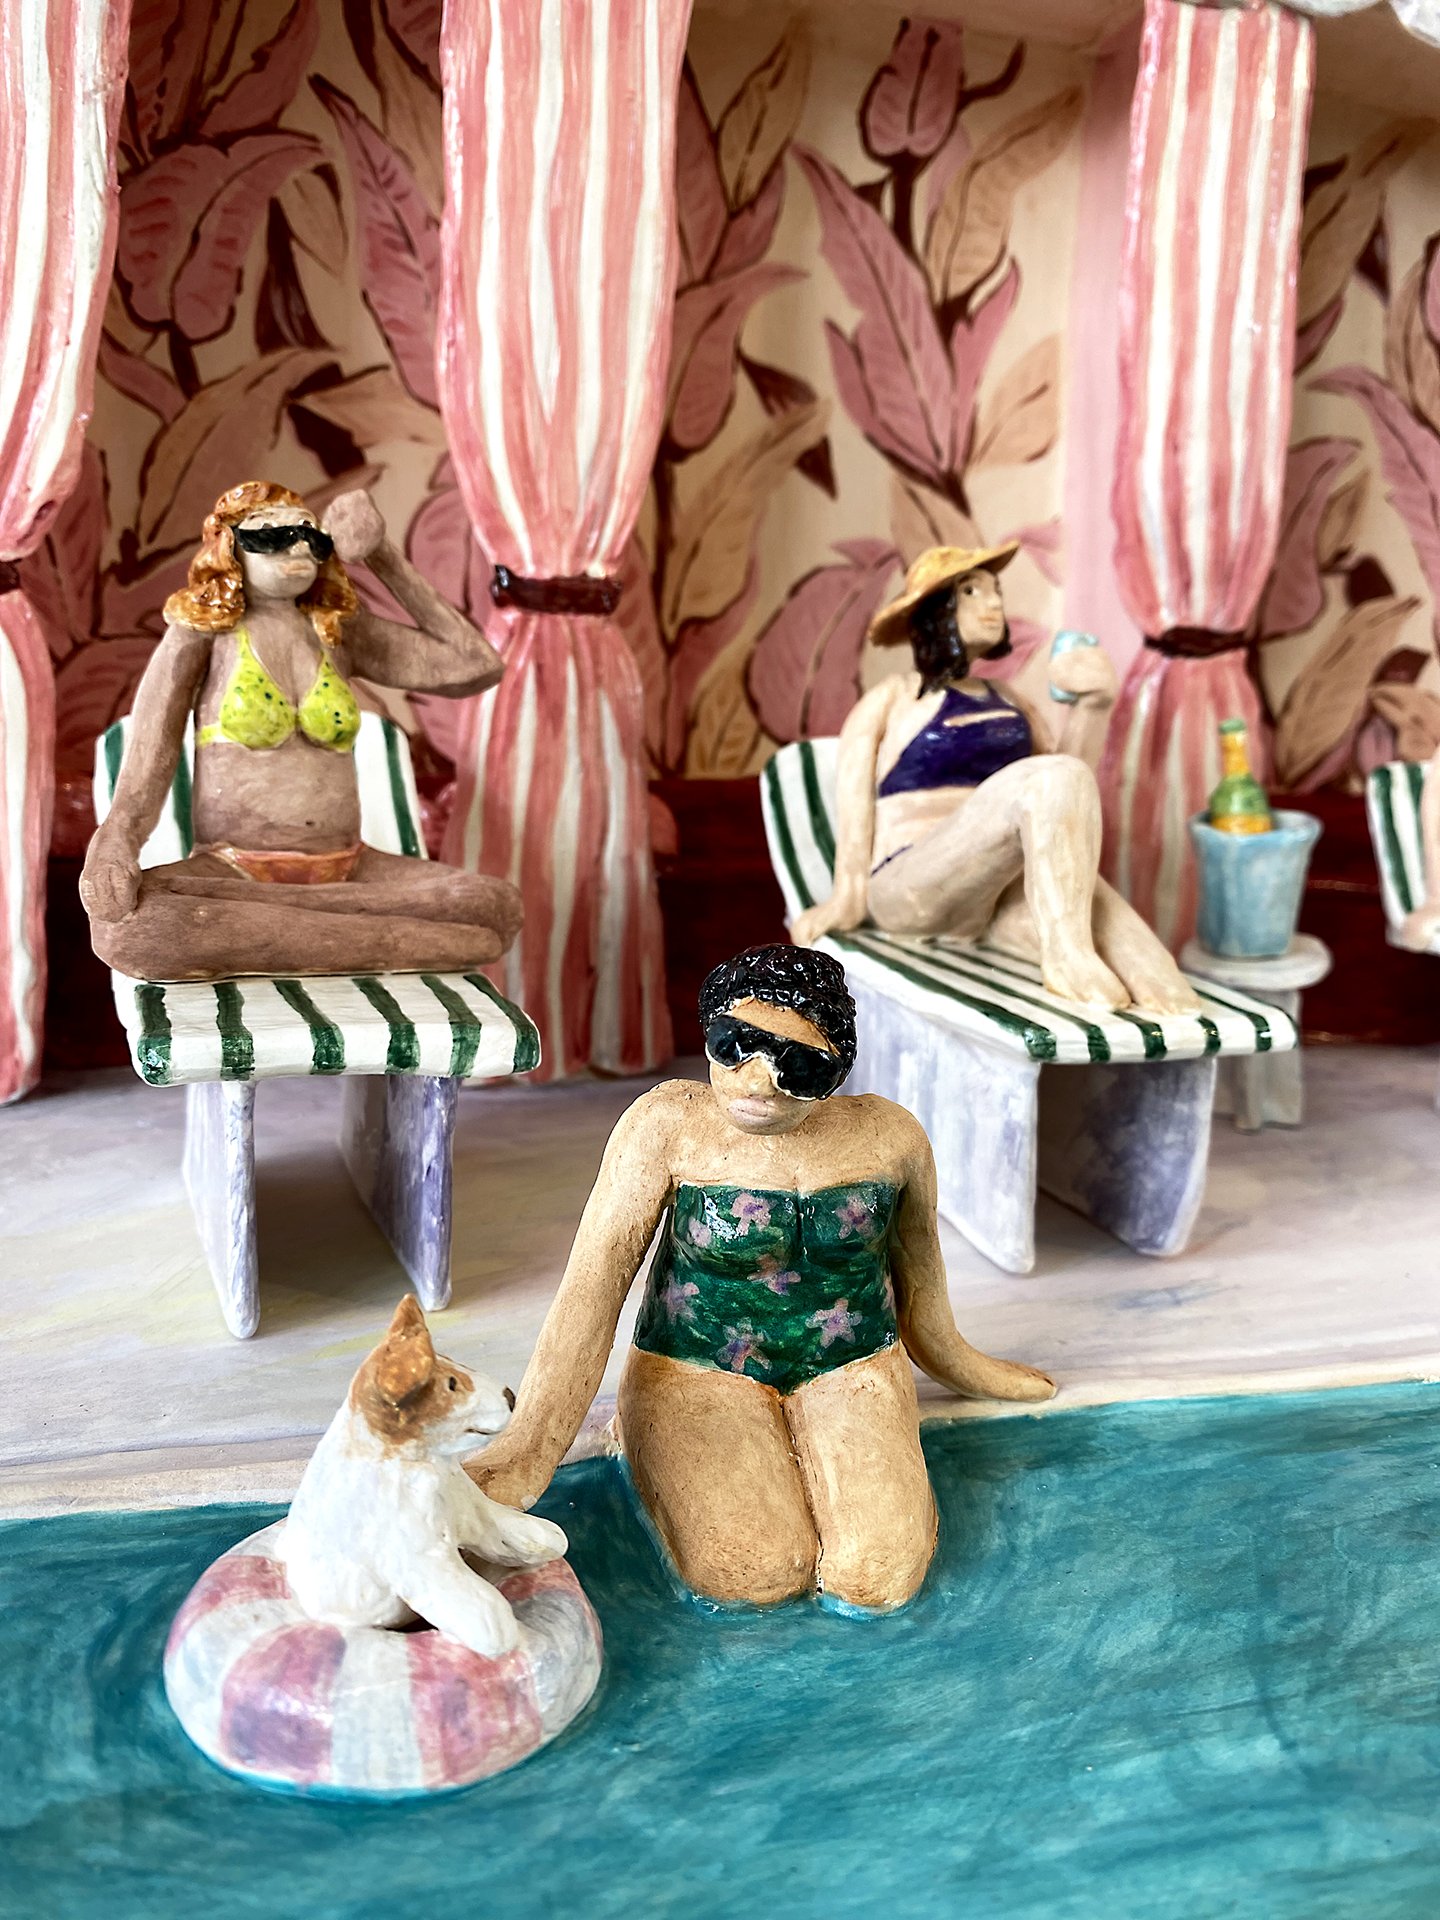 POOLSIDE AT THE BEVERLY HILLS (Detail)